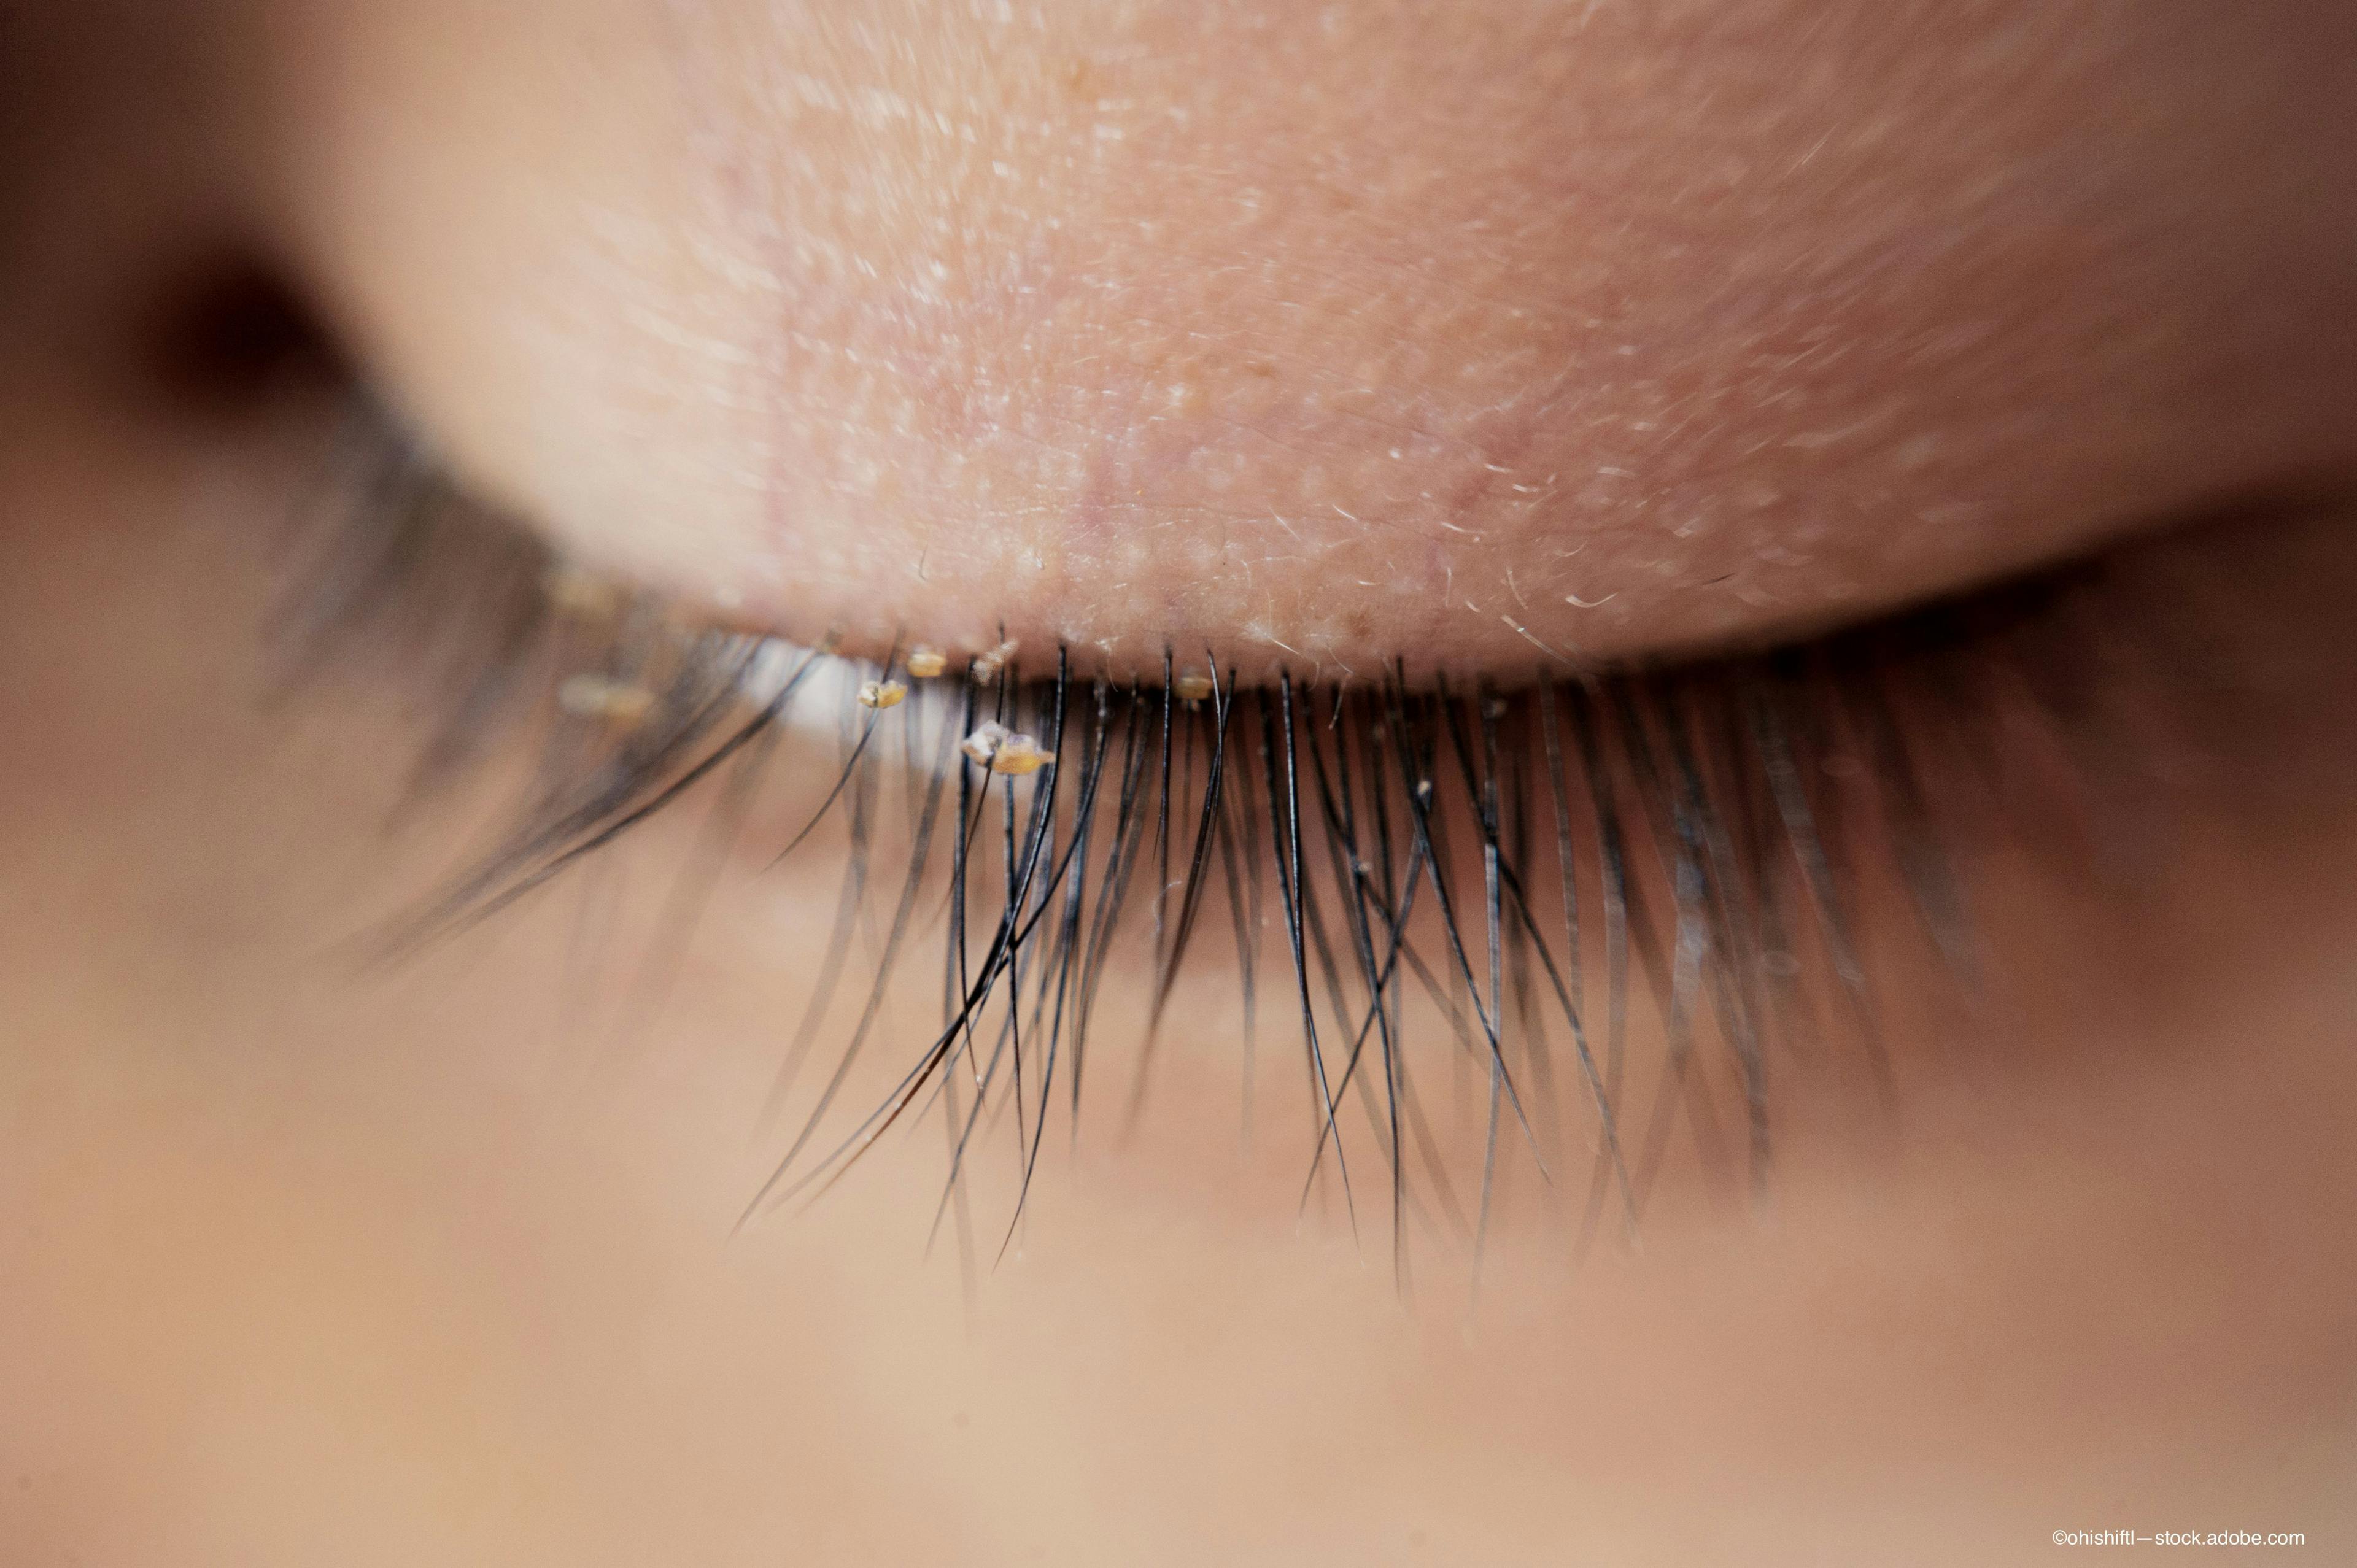 Collarettes on eyelashes indicate Demodex mites and Meibomian Gland Disease which can be treated with lotilaner ophthalmic solution under investigation by Tarsus - Image credit: Adobe Stock /ohishiftl